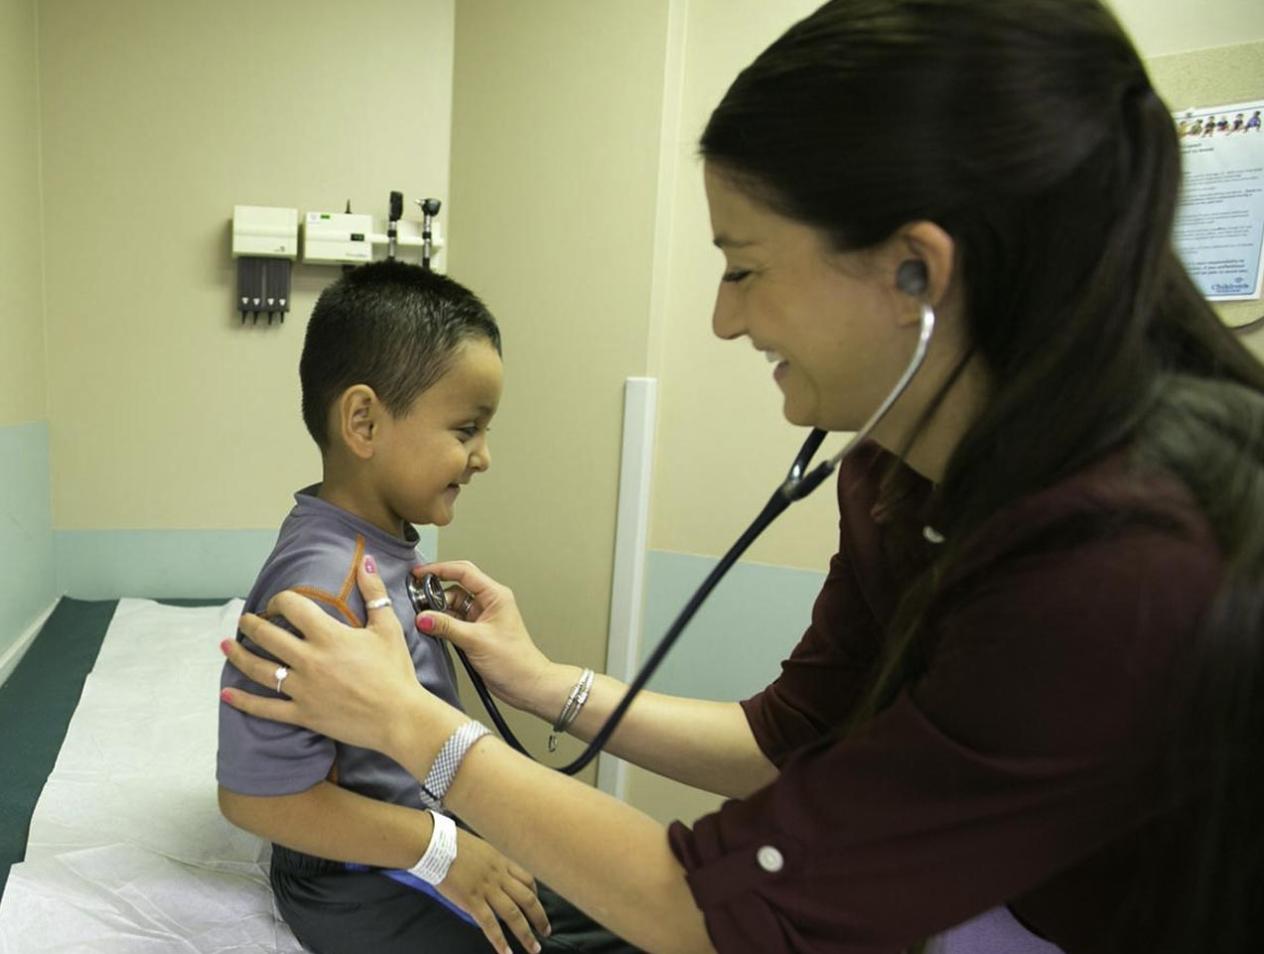 Pediatrician with patient